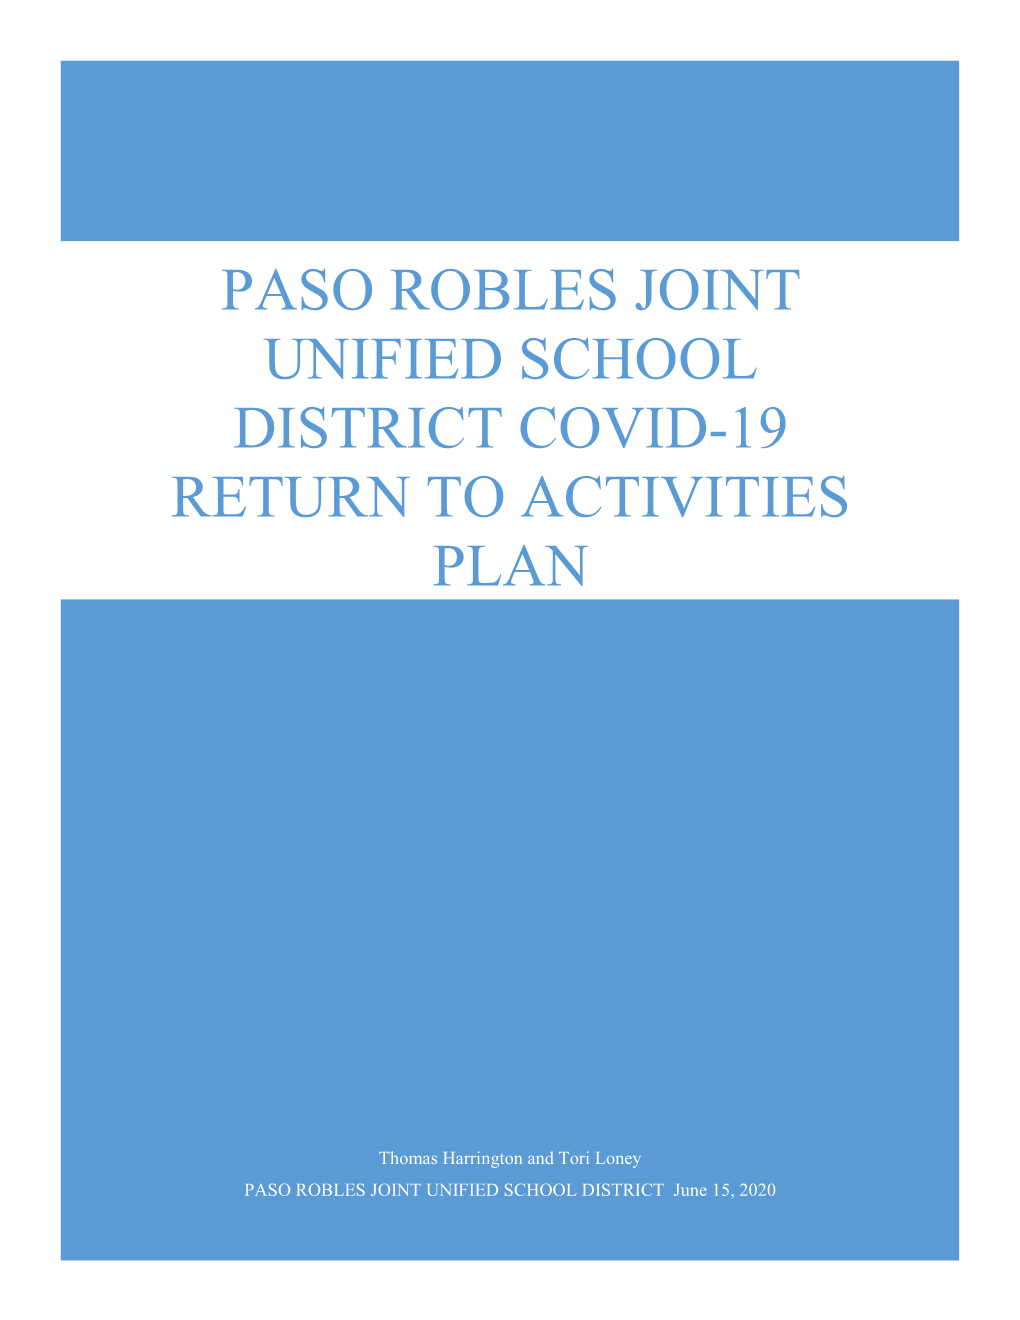 Paso Robles Joint Unified School District Covid-19 Return to Activities Plan